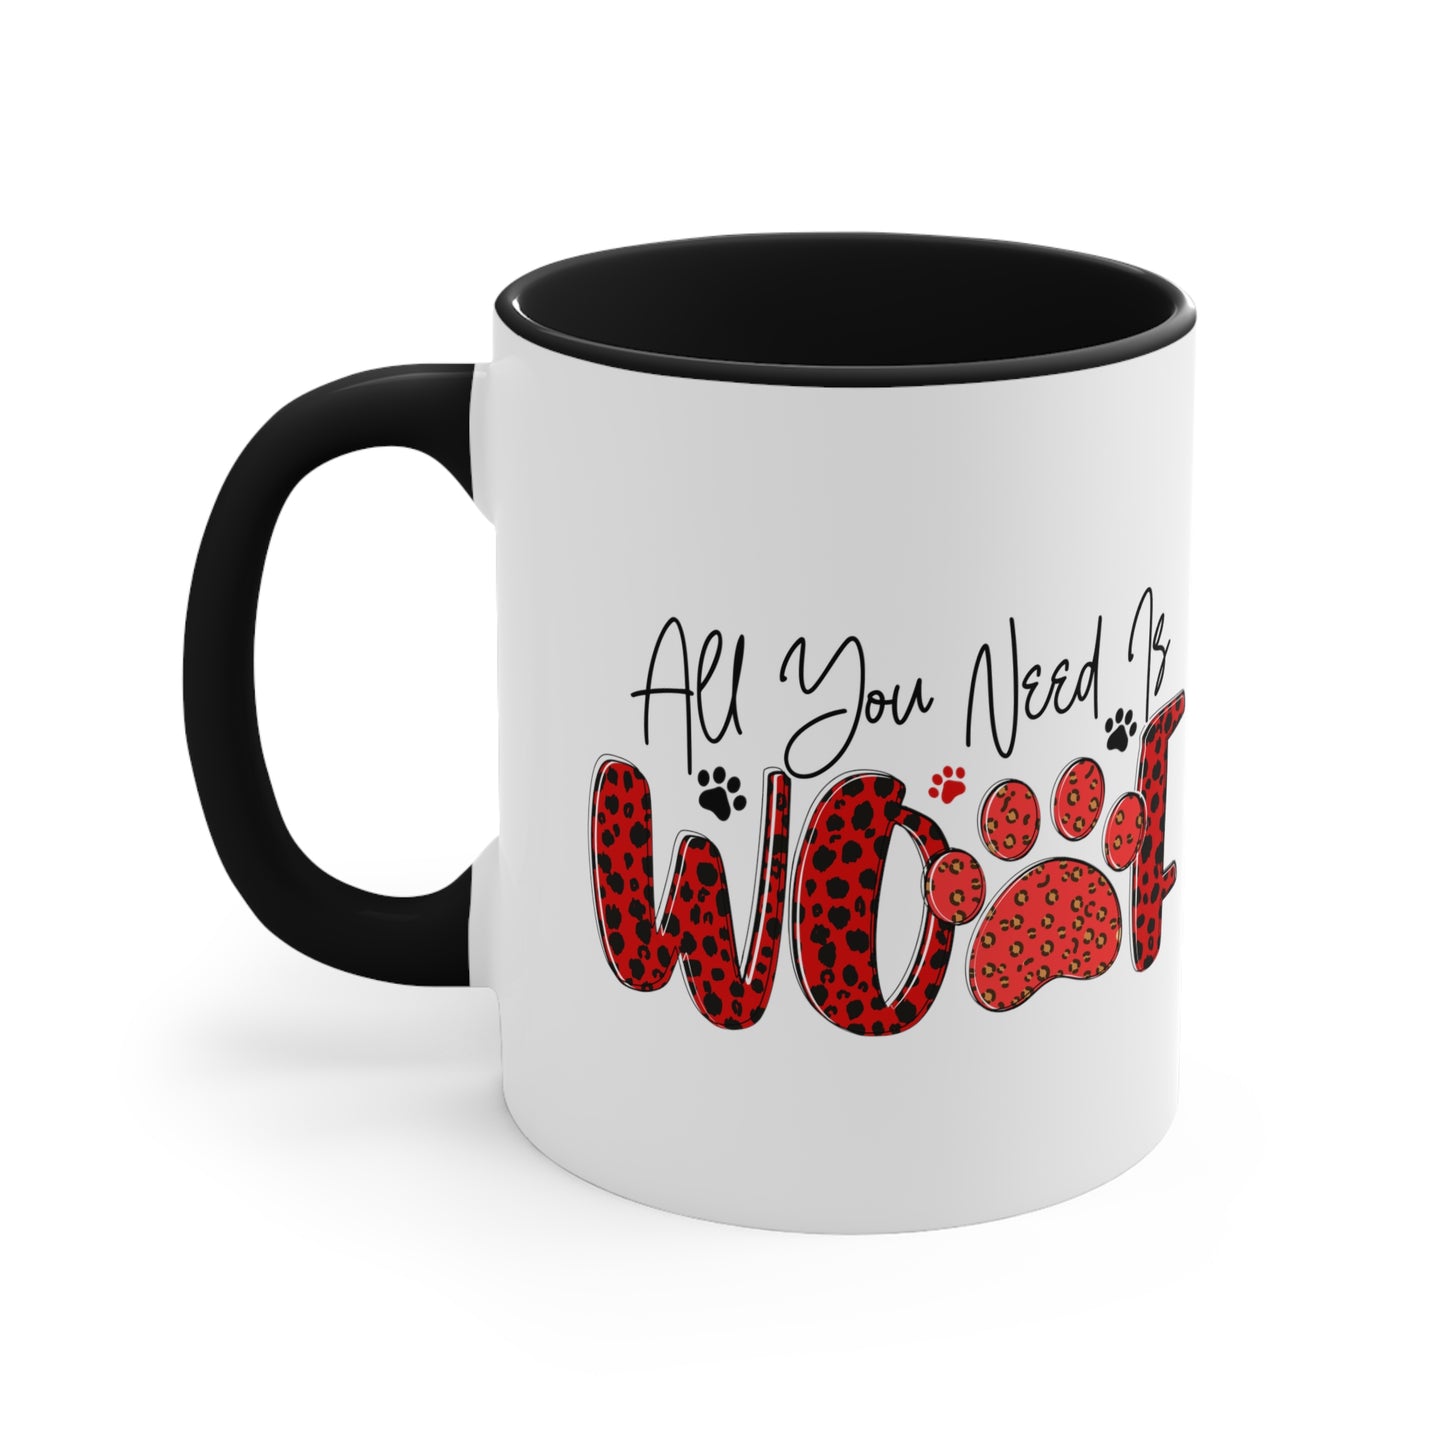 All You Need is Woof Valentines Day Accent Coffee Mug, 11oz